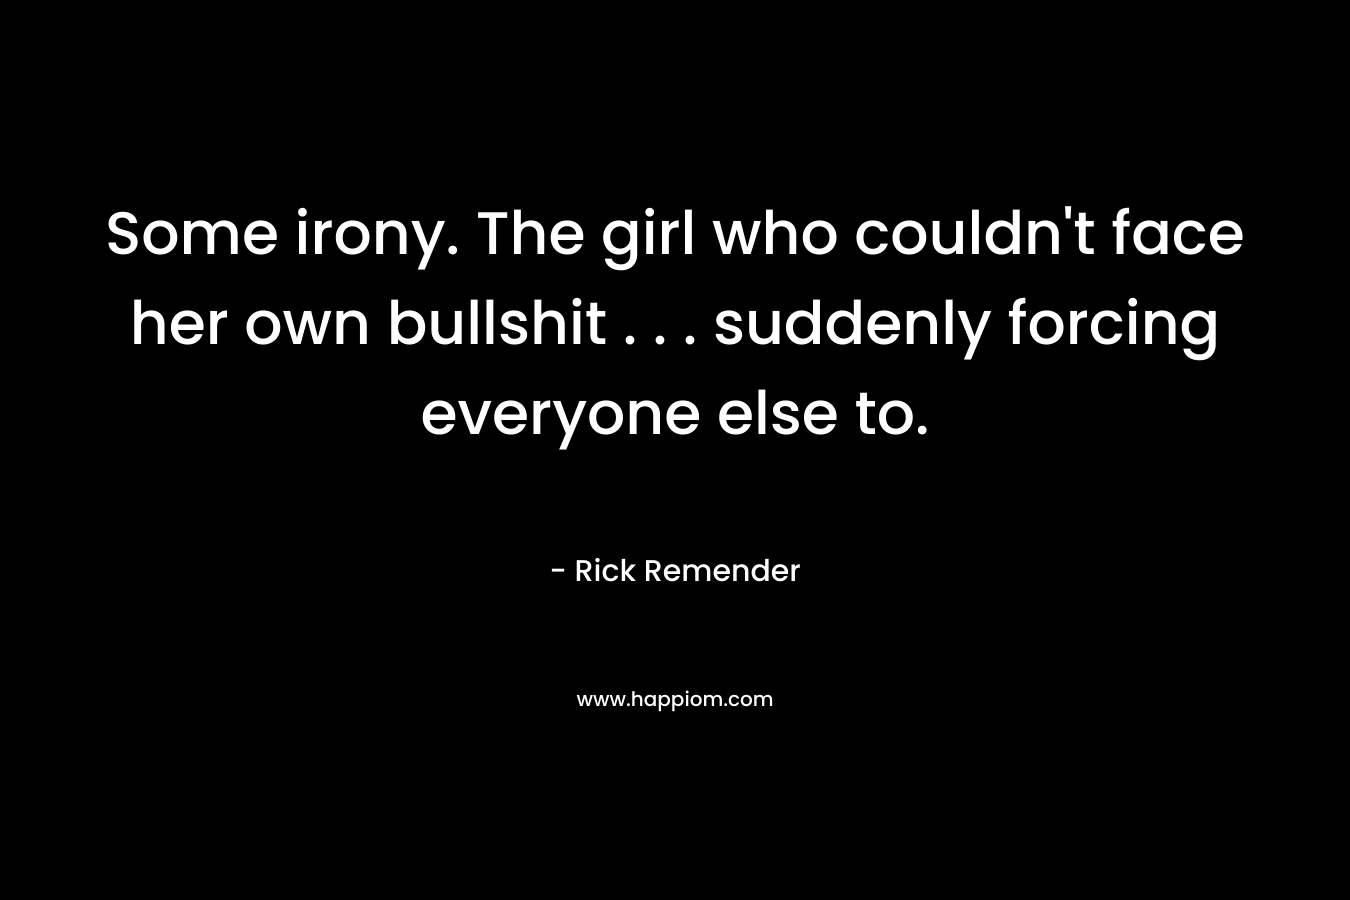 Some irony. The girl who couldn’t face her own bullshit . . . suddenly forcing everyone else to. – Rick Remender